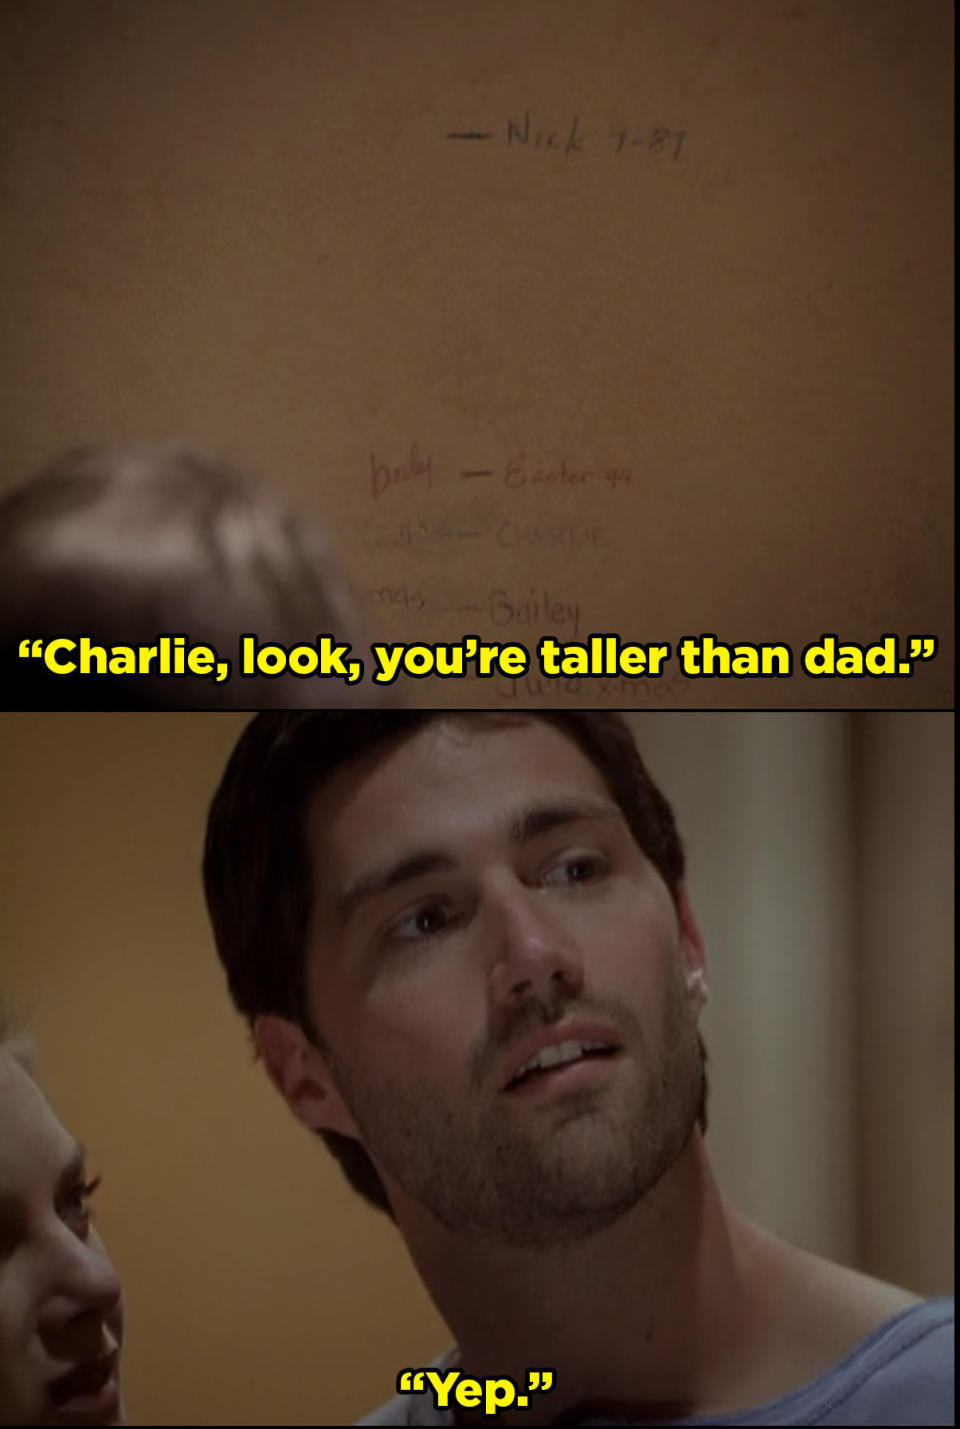 Charlie looks at the wall markings as Claudia says, "Charlie, look, you're taller than dad" and he says, "yep"